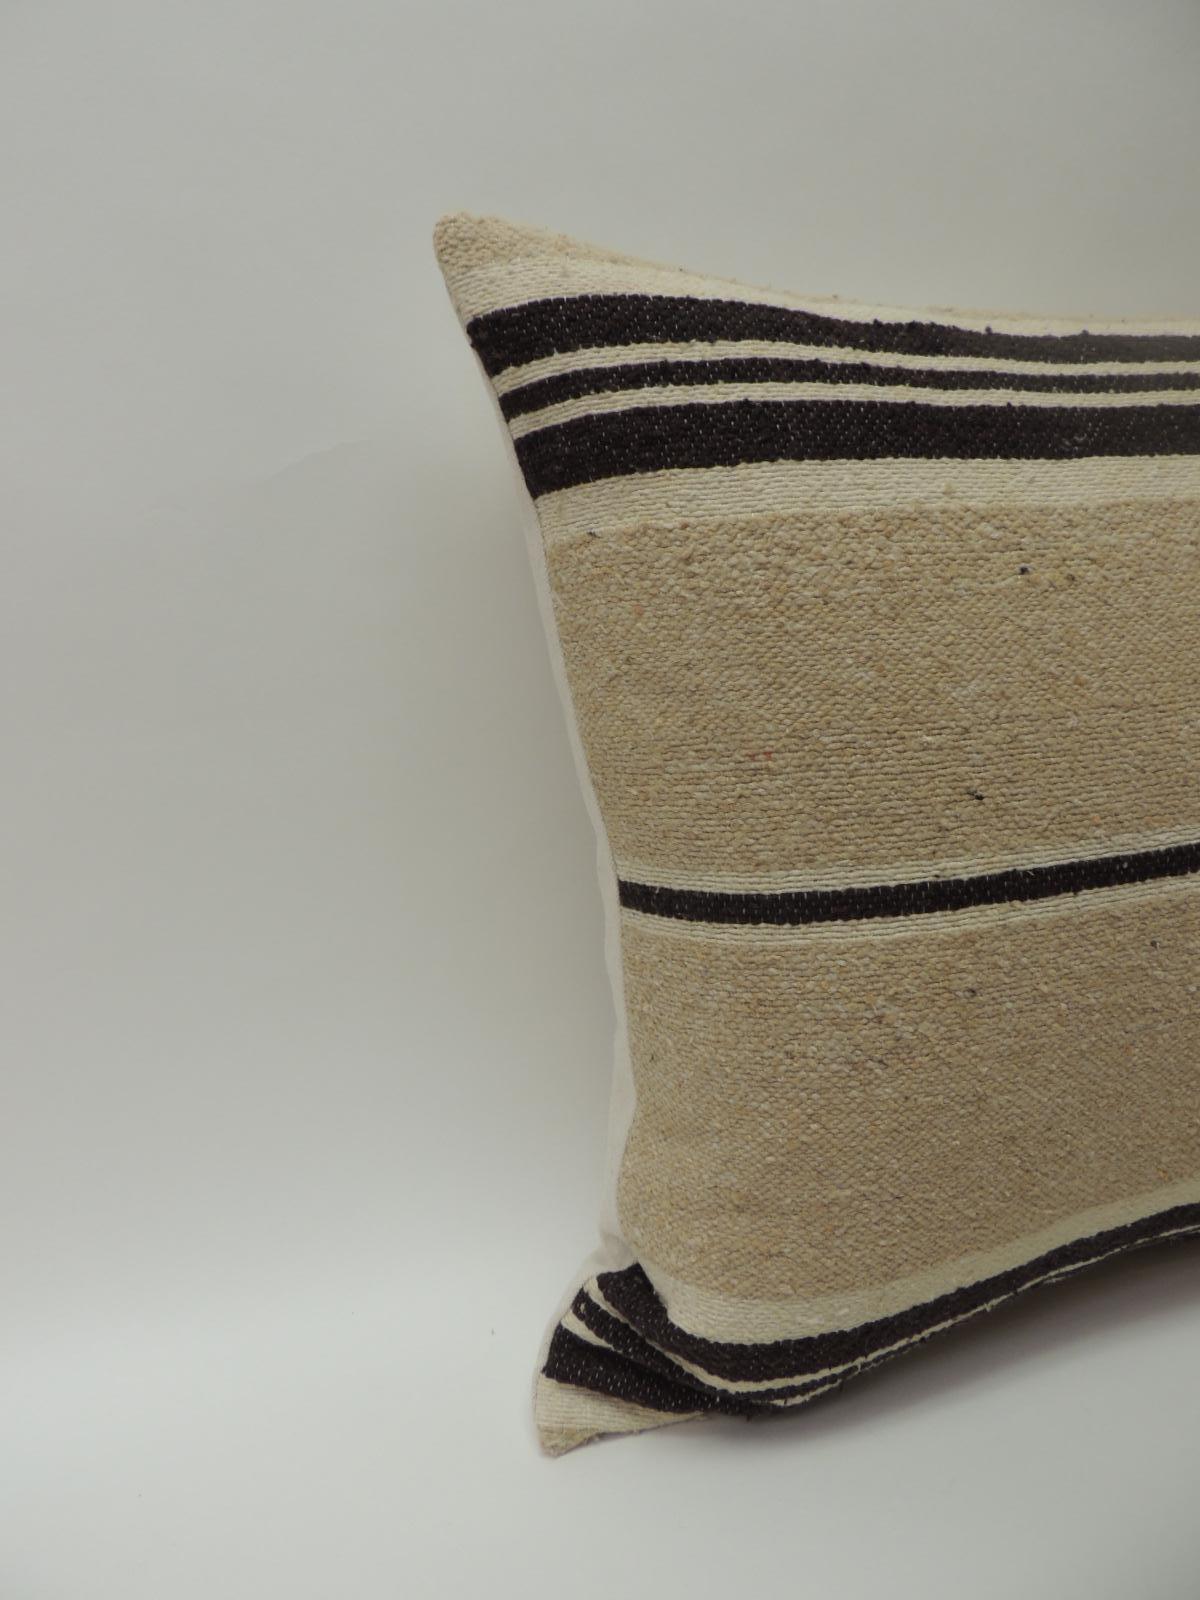 Vintage African woven tribal artisanal textile decorative pillow.
Tunisian vintage artisanal tribal textile decorative pillows handcrafted from the vintage wool and hemp hand-loomed by the Berber tribes from the Atlas Mountains of Morocco. Natural